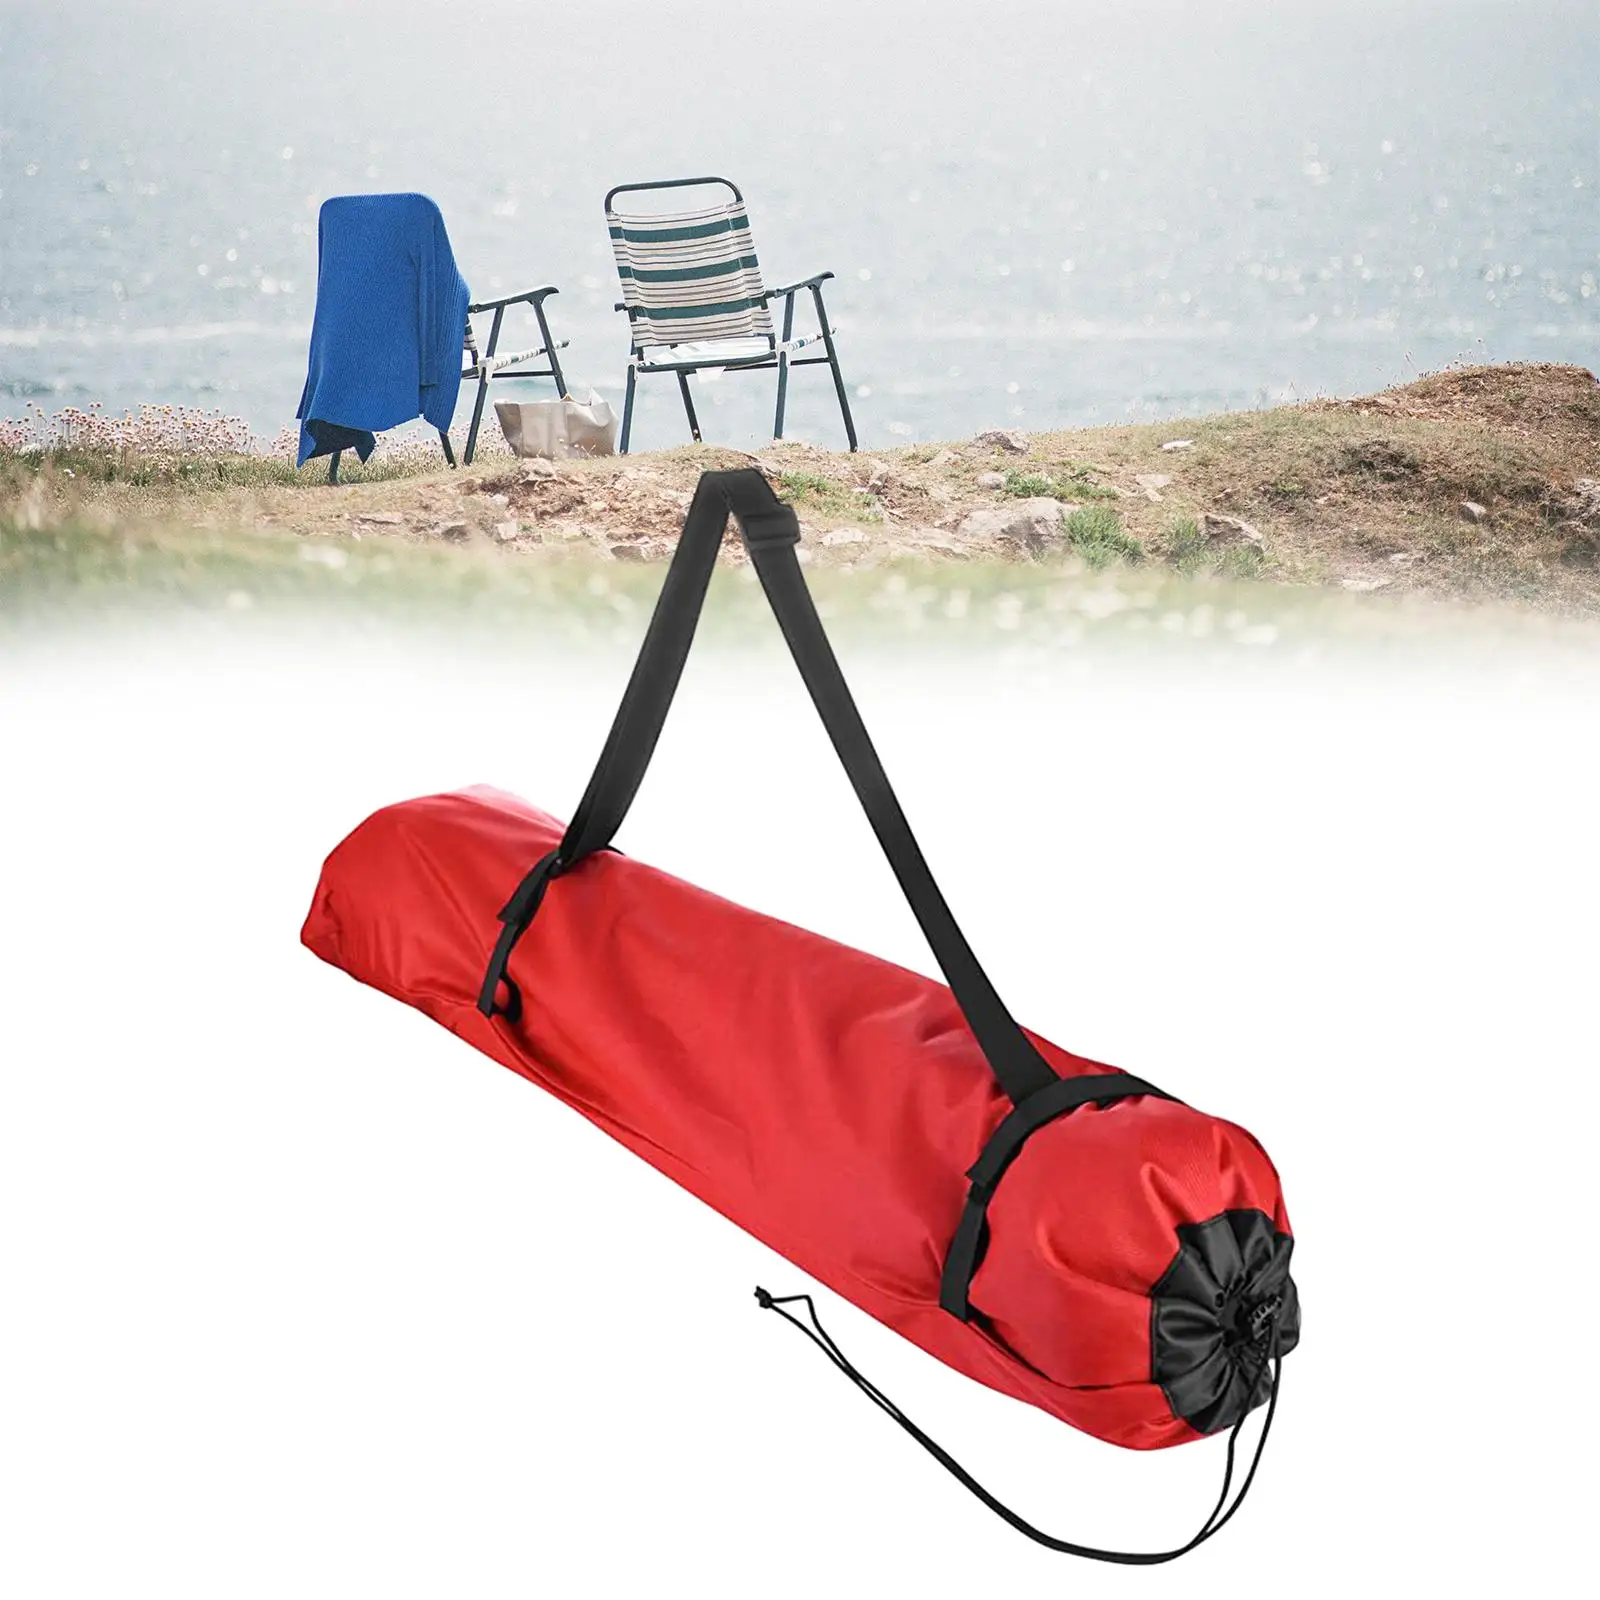 Folding Chair Storage Bag Drawstring Closure Portable Camping Chair Replacement Bag for Fishing Hiking Backpacking Travel Beach